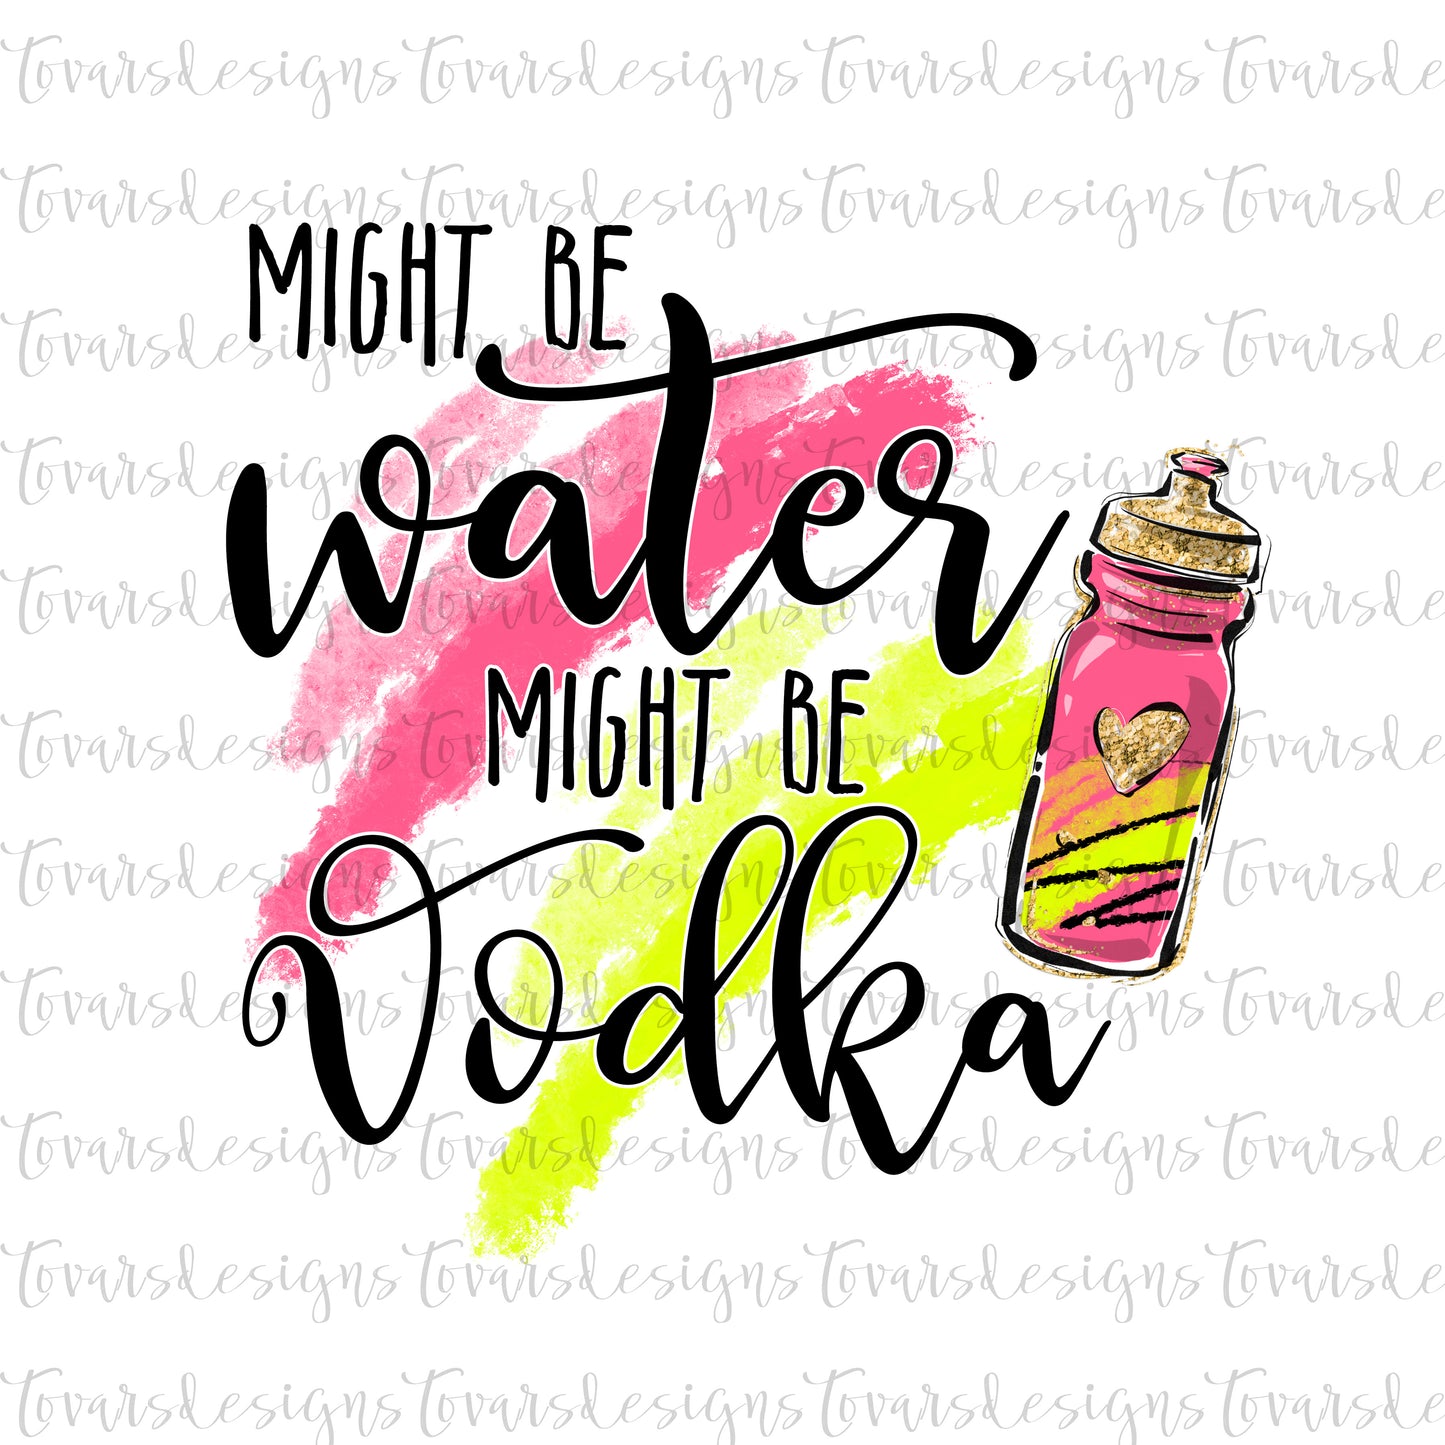 Might be water might be vodka, png download, funny sublimation design, vodka design, might be water might be vodka, funny sublimation png